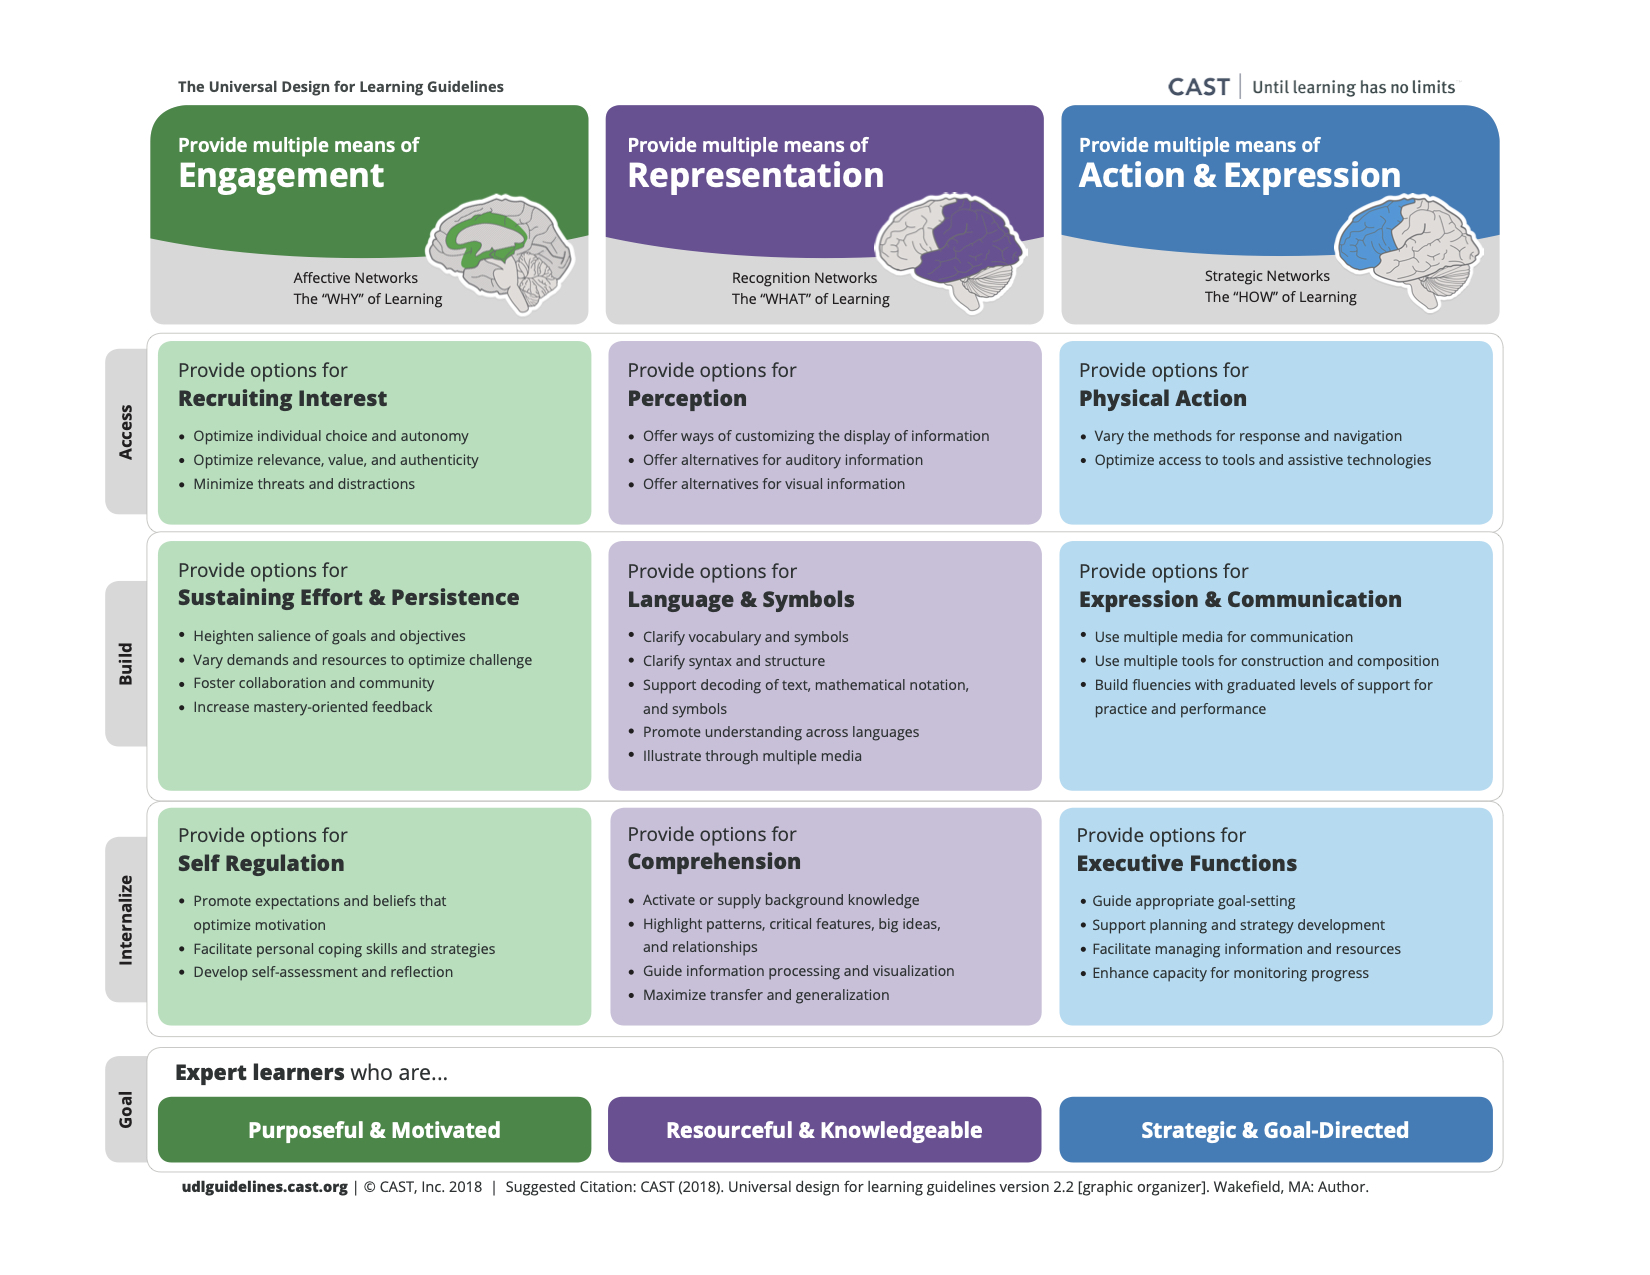 UDL guidelines developed by CAST. This image contains text; the link above directs to an accessible version of this image.